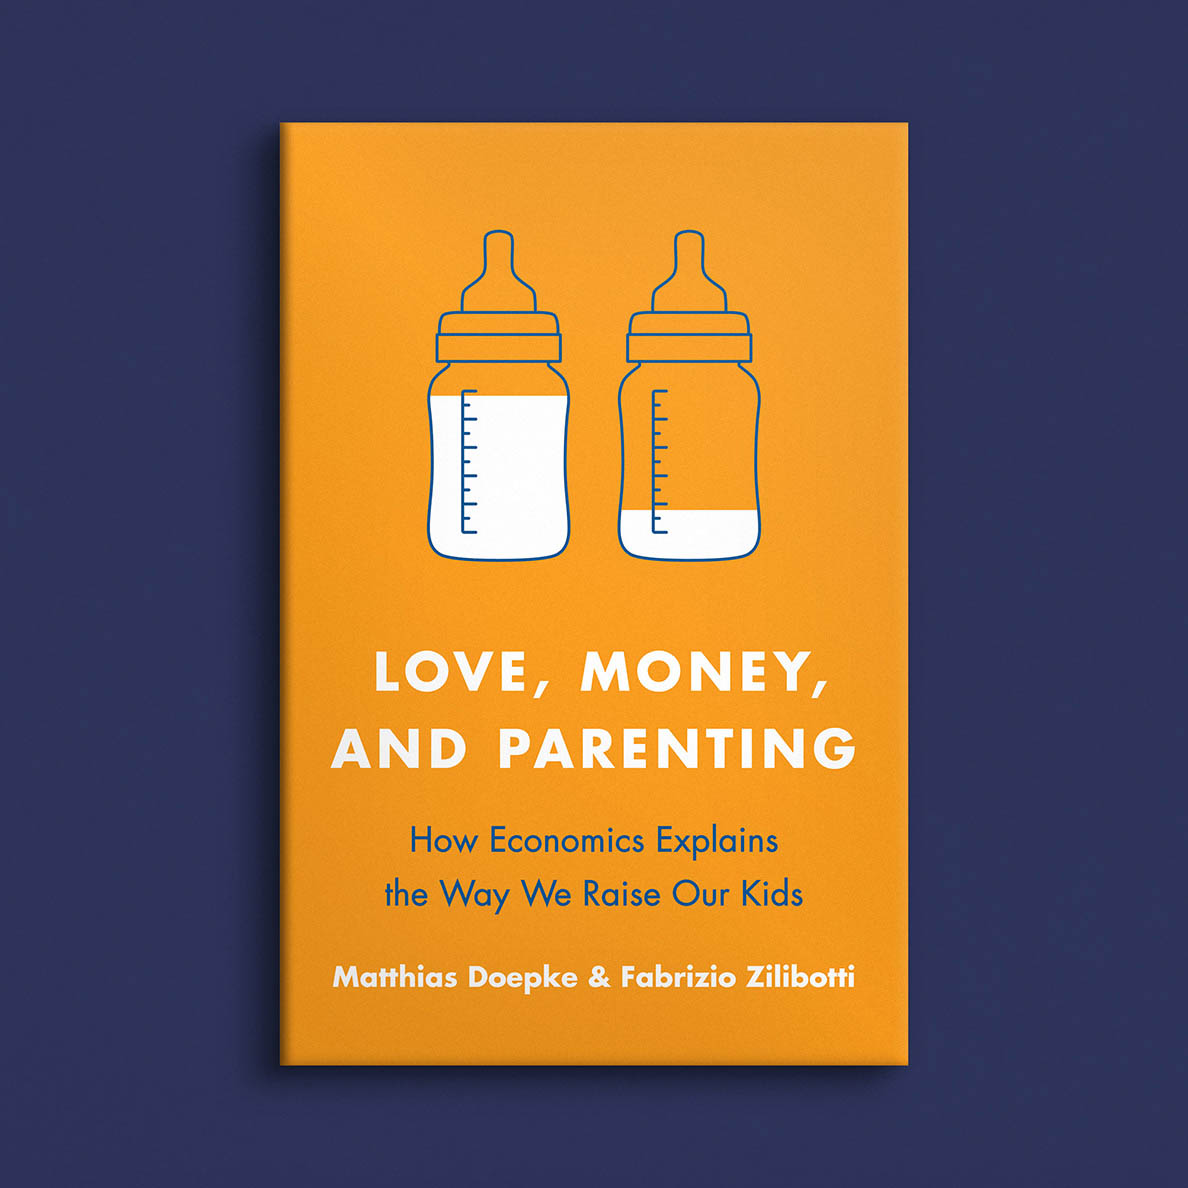 Love, Money, and Parenting book cover